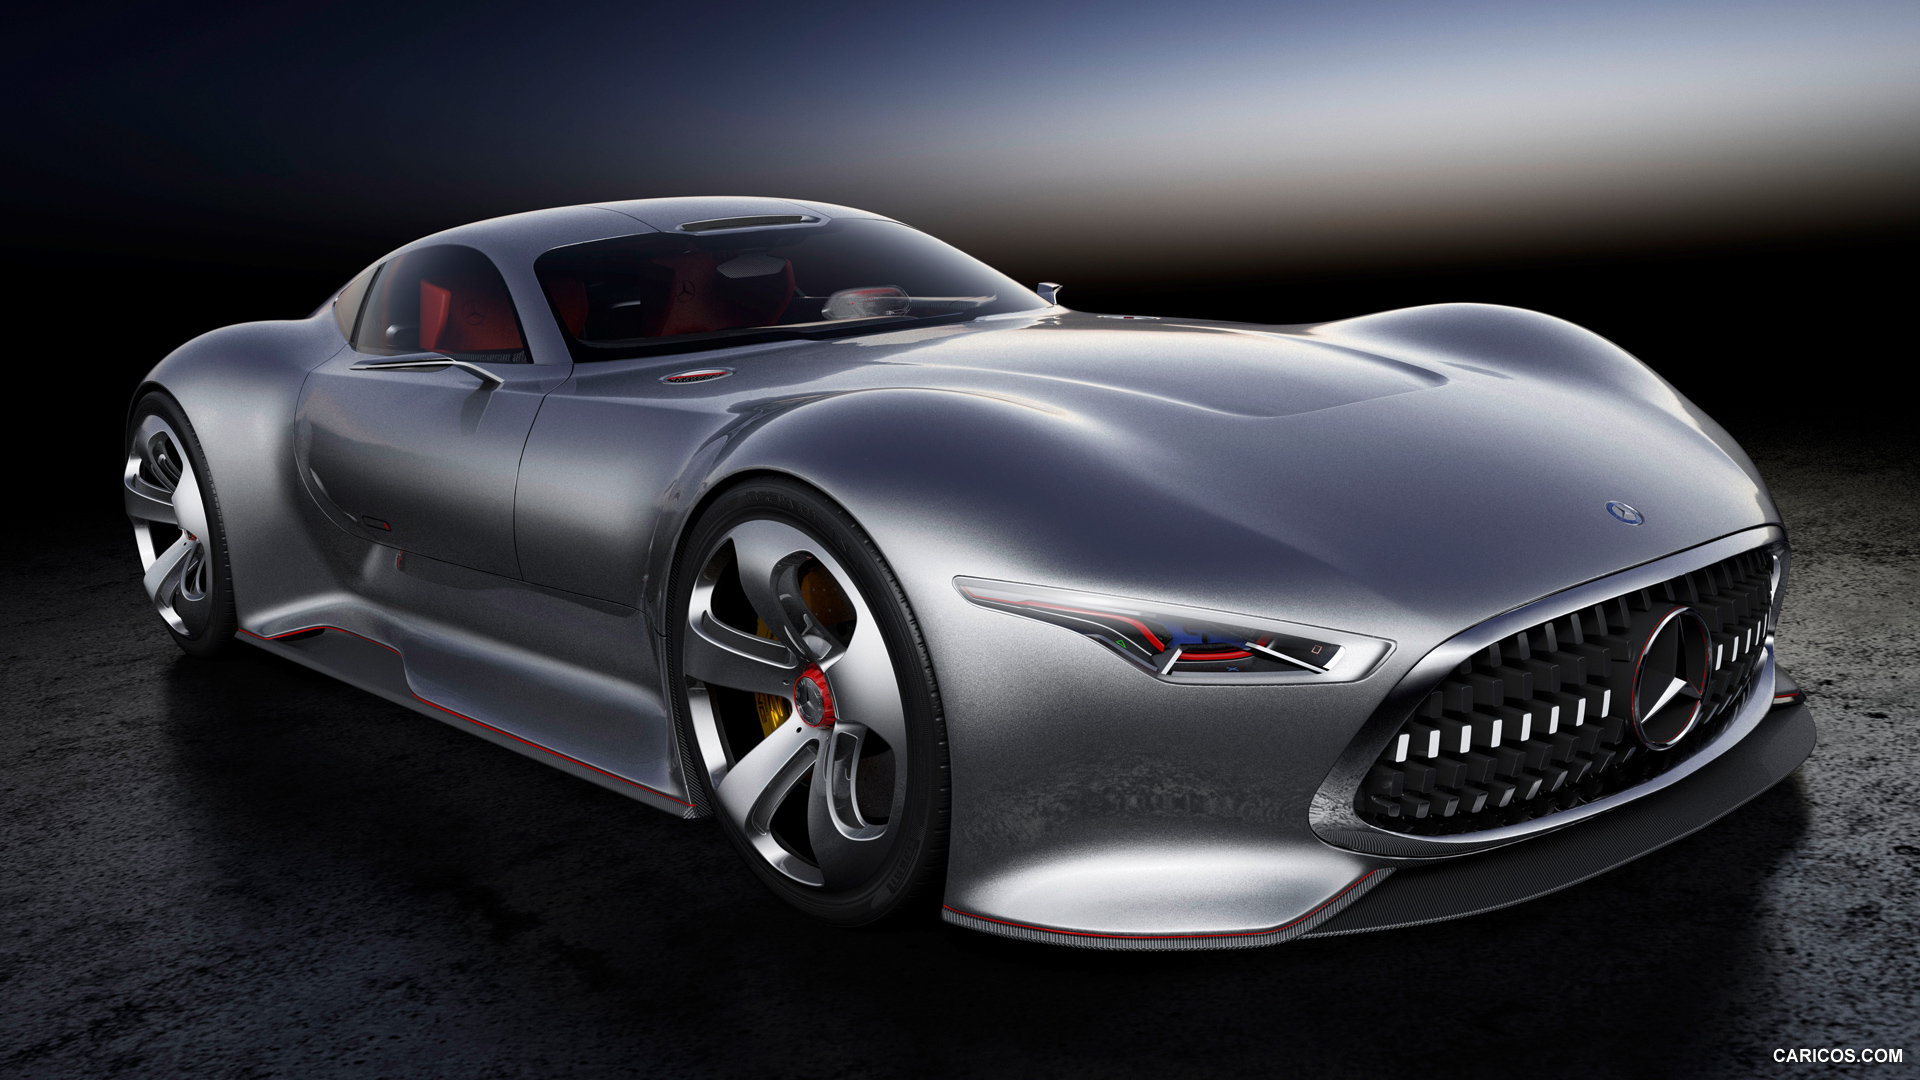 Mercedes-Benz AMG Vision Gran Turismo Concept (2013)  - Front, #18 of 25